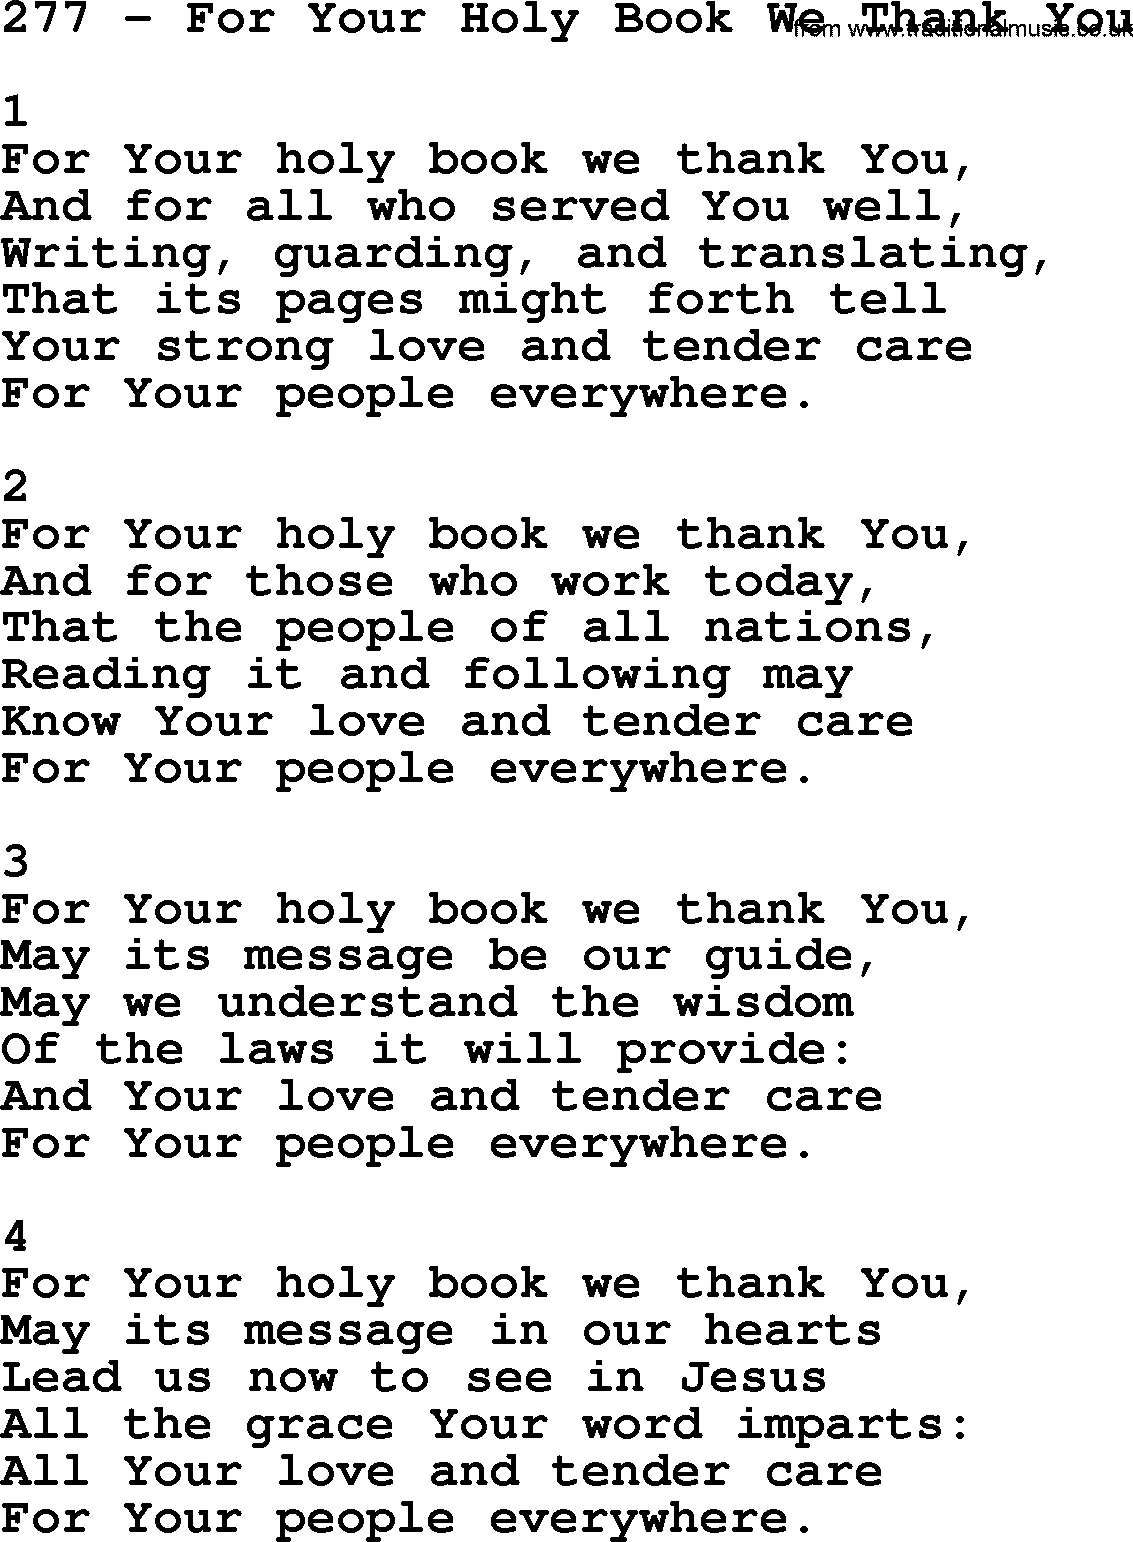 Complete Adventis Hymnal, title: 277-For Your Holy Book We Thank You, with lyrics, midi, mp3, powerpoints(PPT) and PDF,